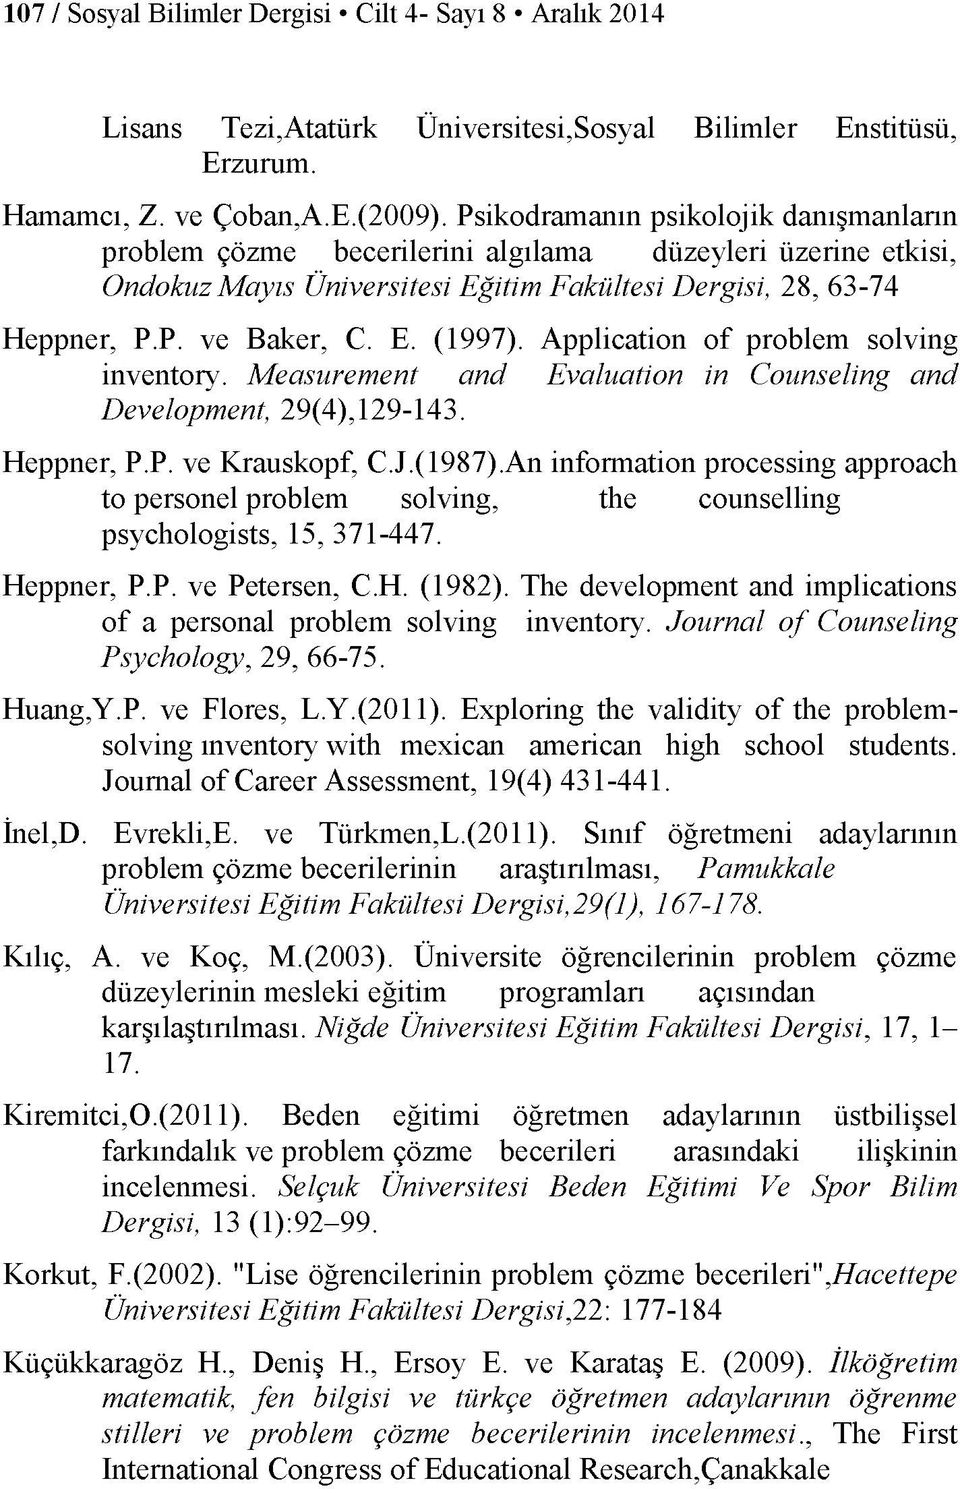 Application of problem solving inventory. Measurement and Evaluation in Counseling and Development, 29(4),129-143. Heppner, P.P. ve Krauskopf, C.J.(1987).